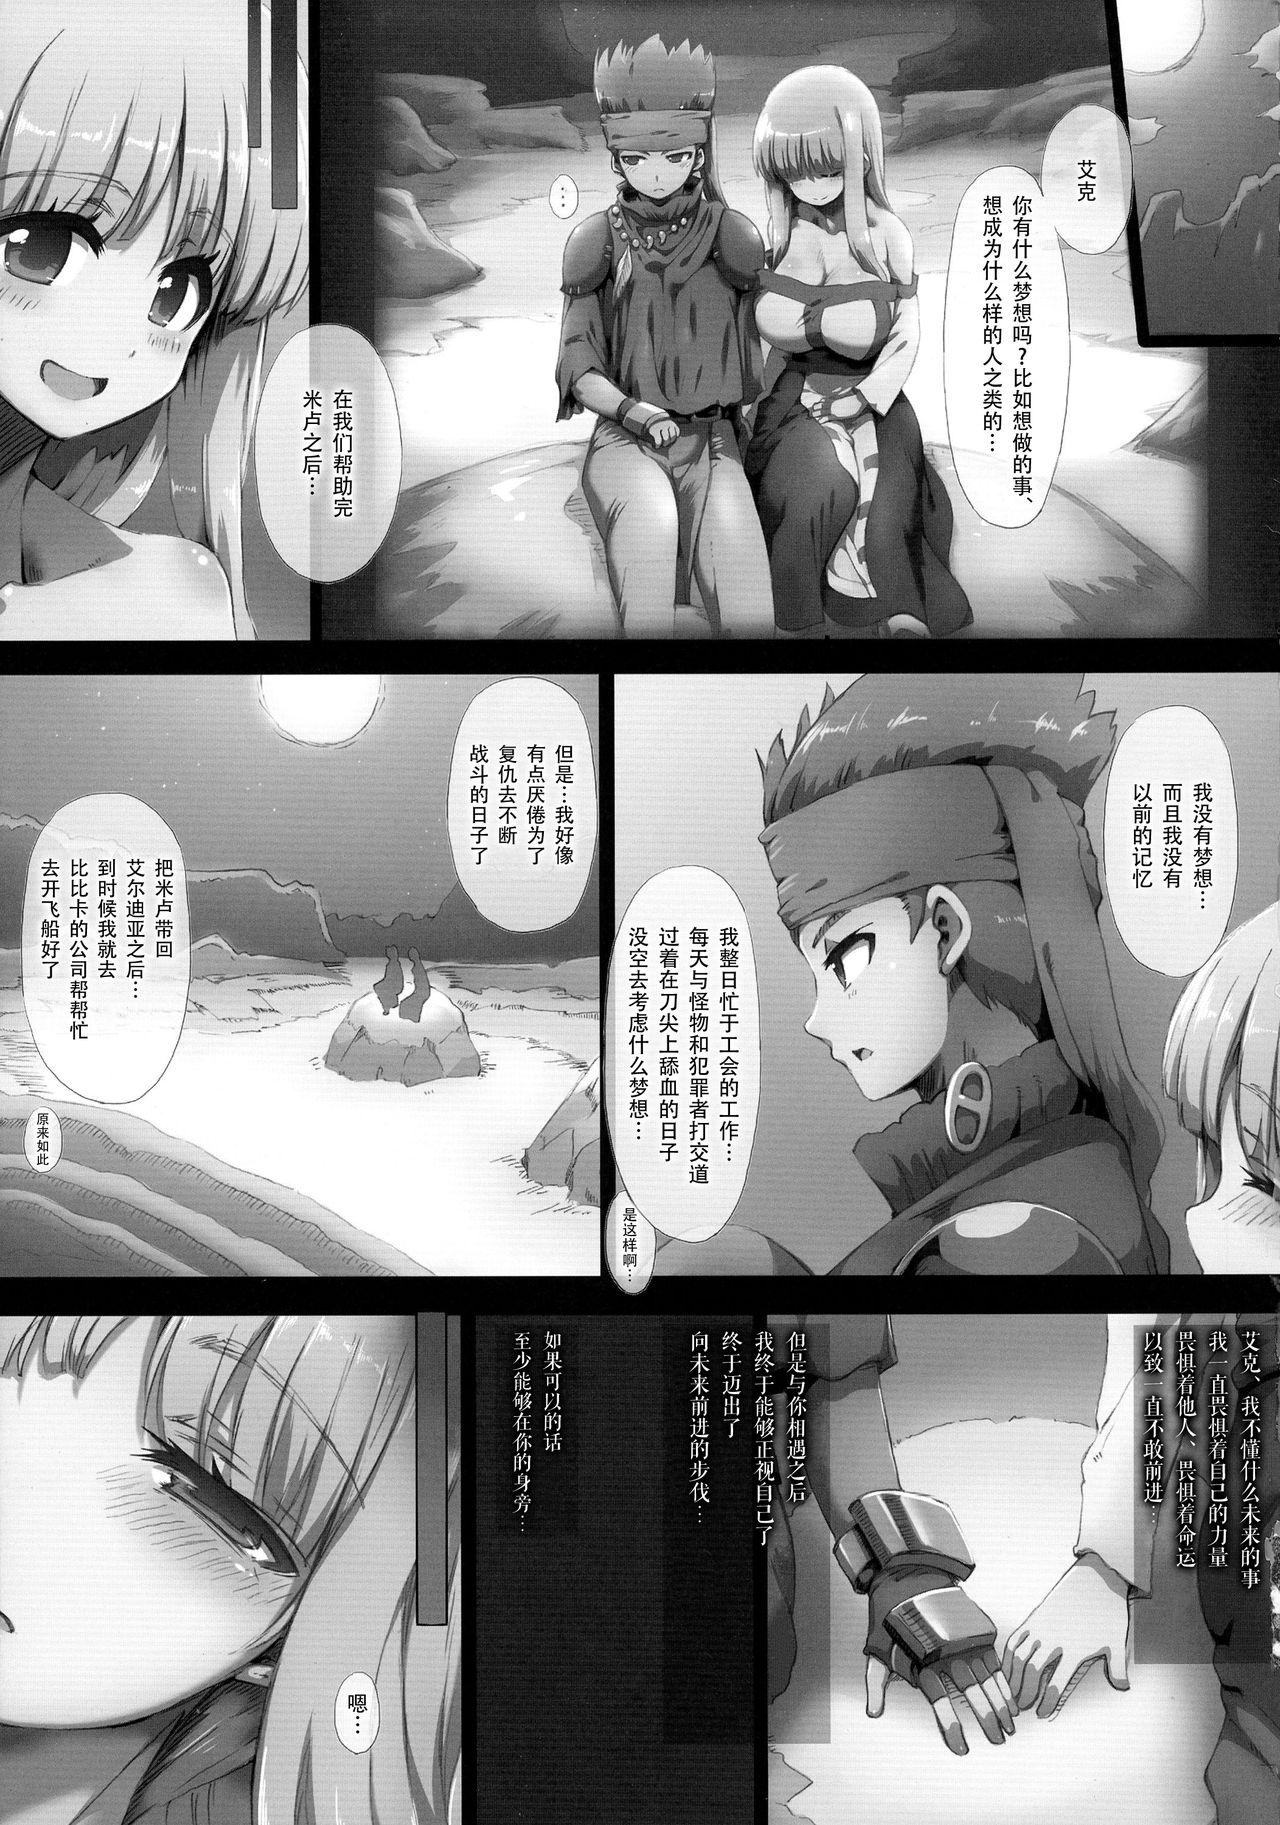 Free Hardcore [GREAT Acta (tokyo)] Lieza Origin (Arc The Lad)[Chinese]【不可视汉化】 - Arc the lad Footfetish - Page 6